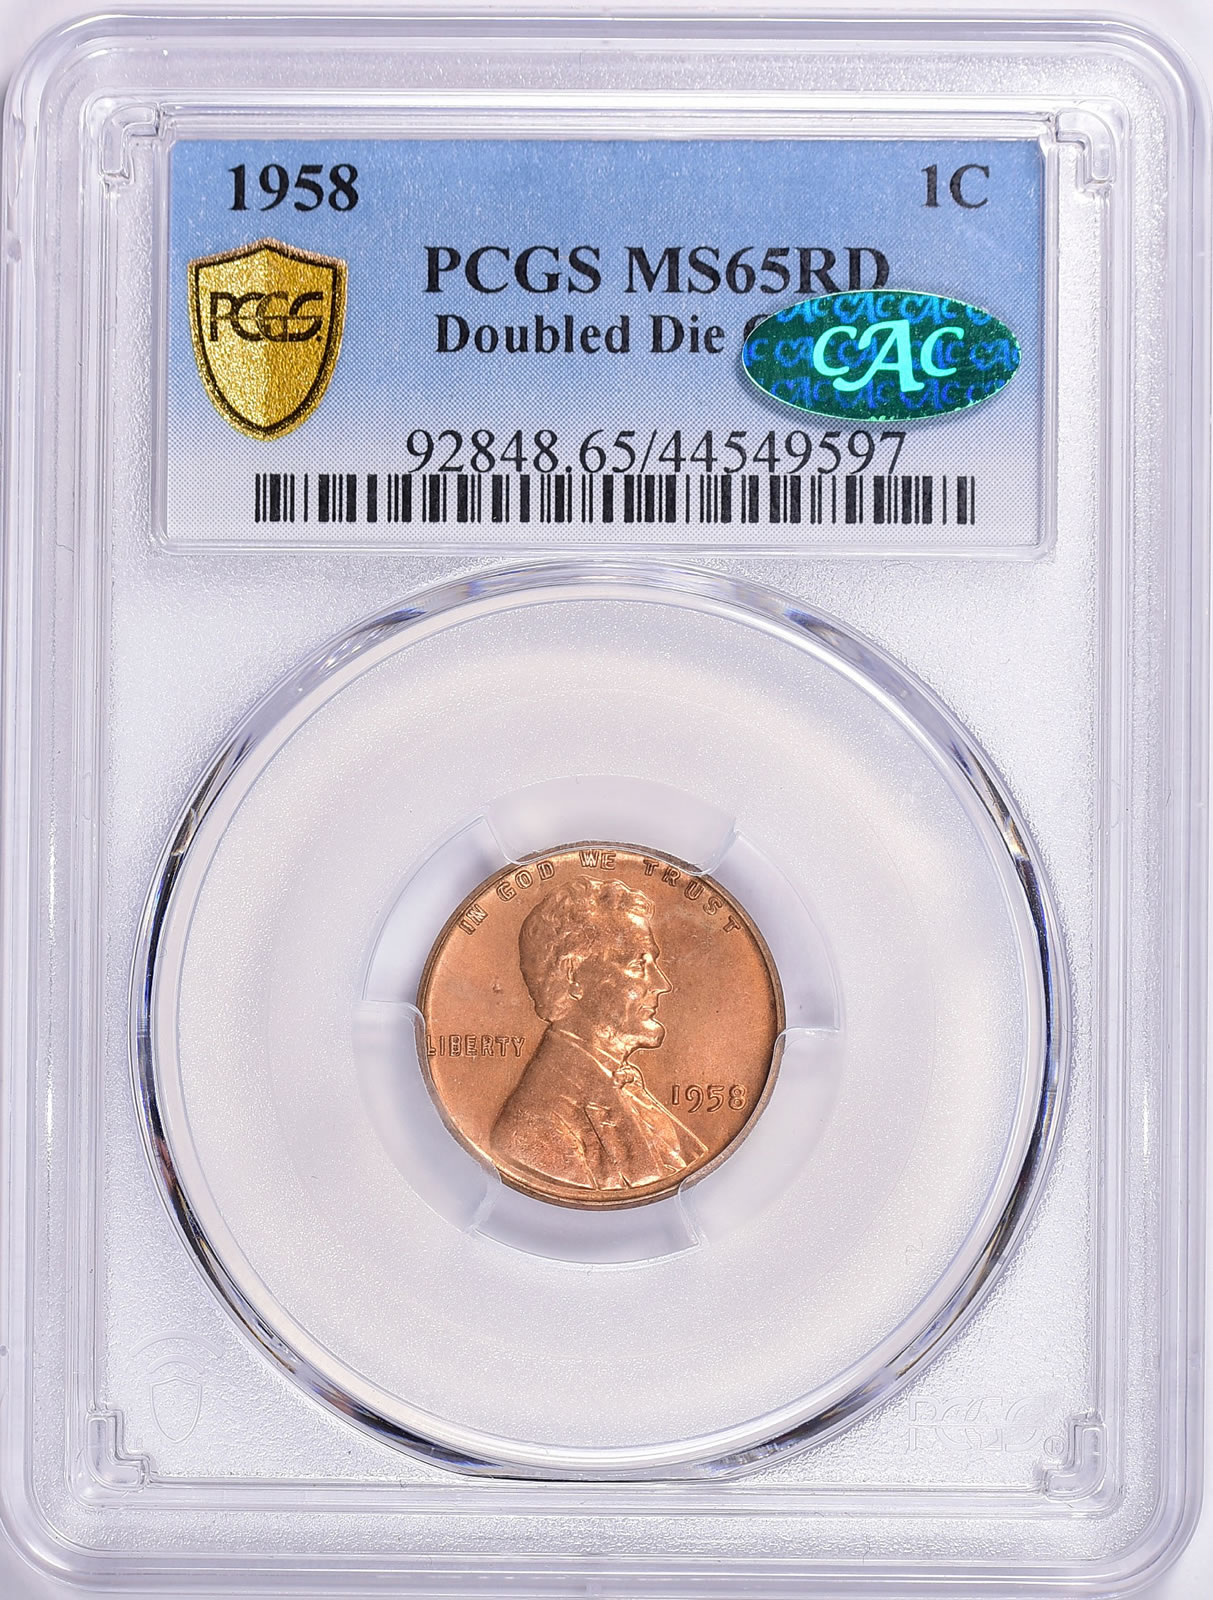 Lincoln Cent Collection Realizes $7.7 Million | CoinNews